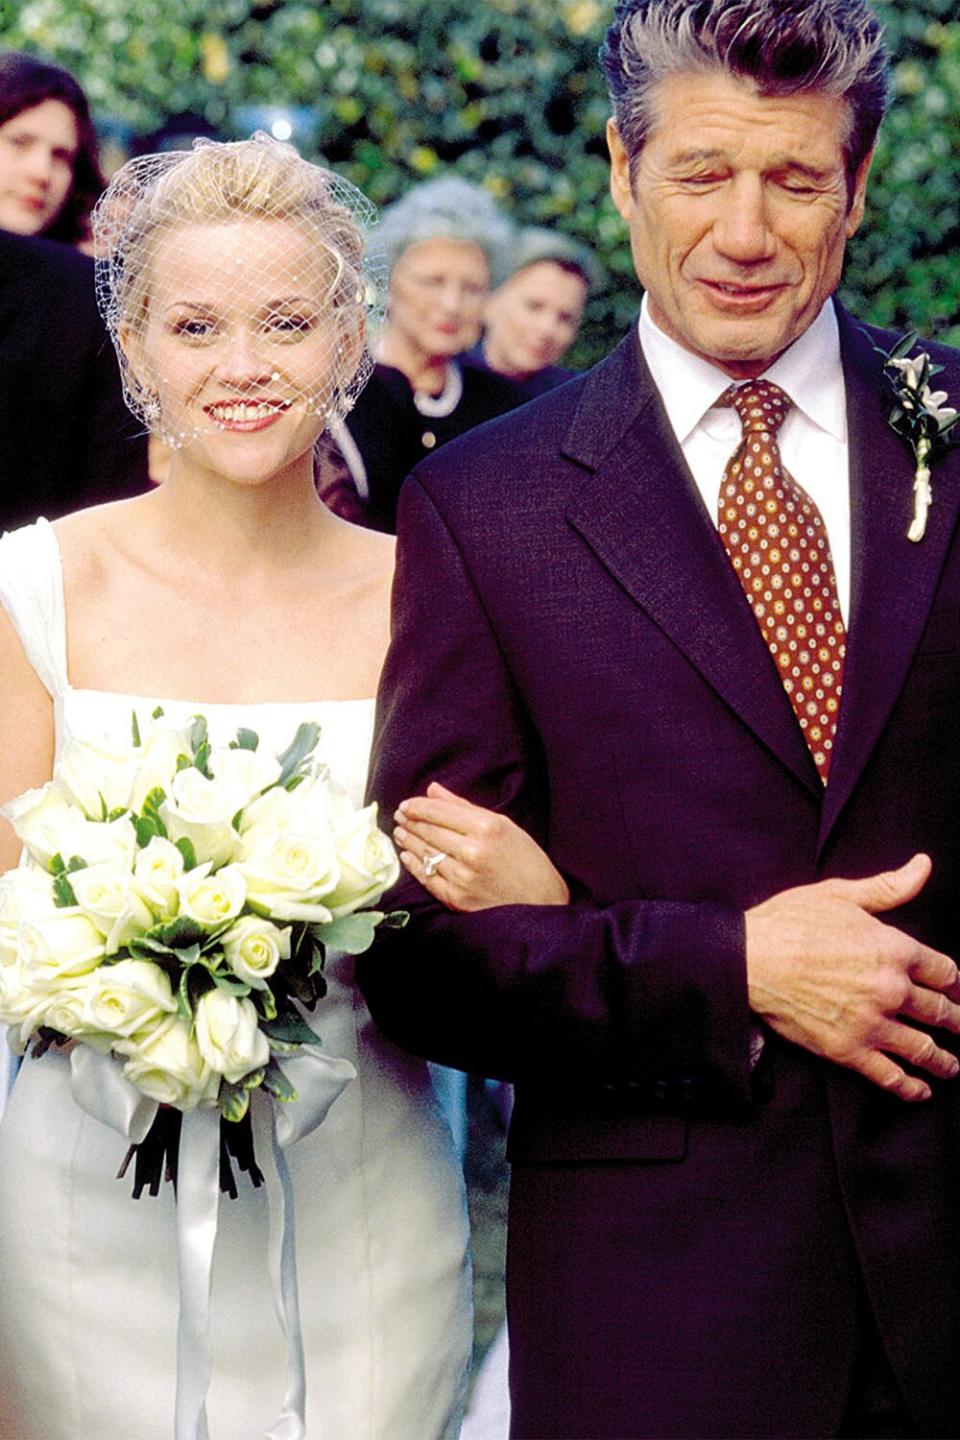 SWEET HOME ALABAMA, from left: Reese Witherspoon, Fred Ward, 2002. ph: © Buena Vista Pictures / courtesy Everett Collection